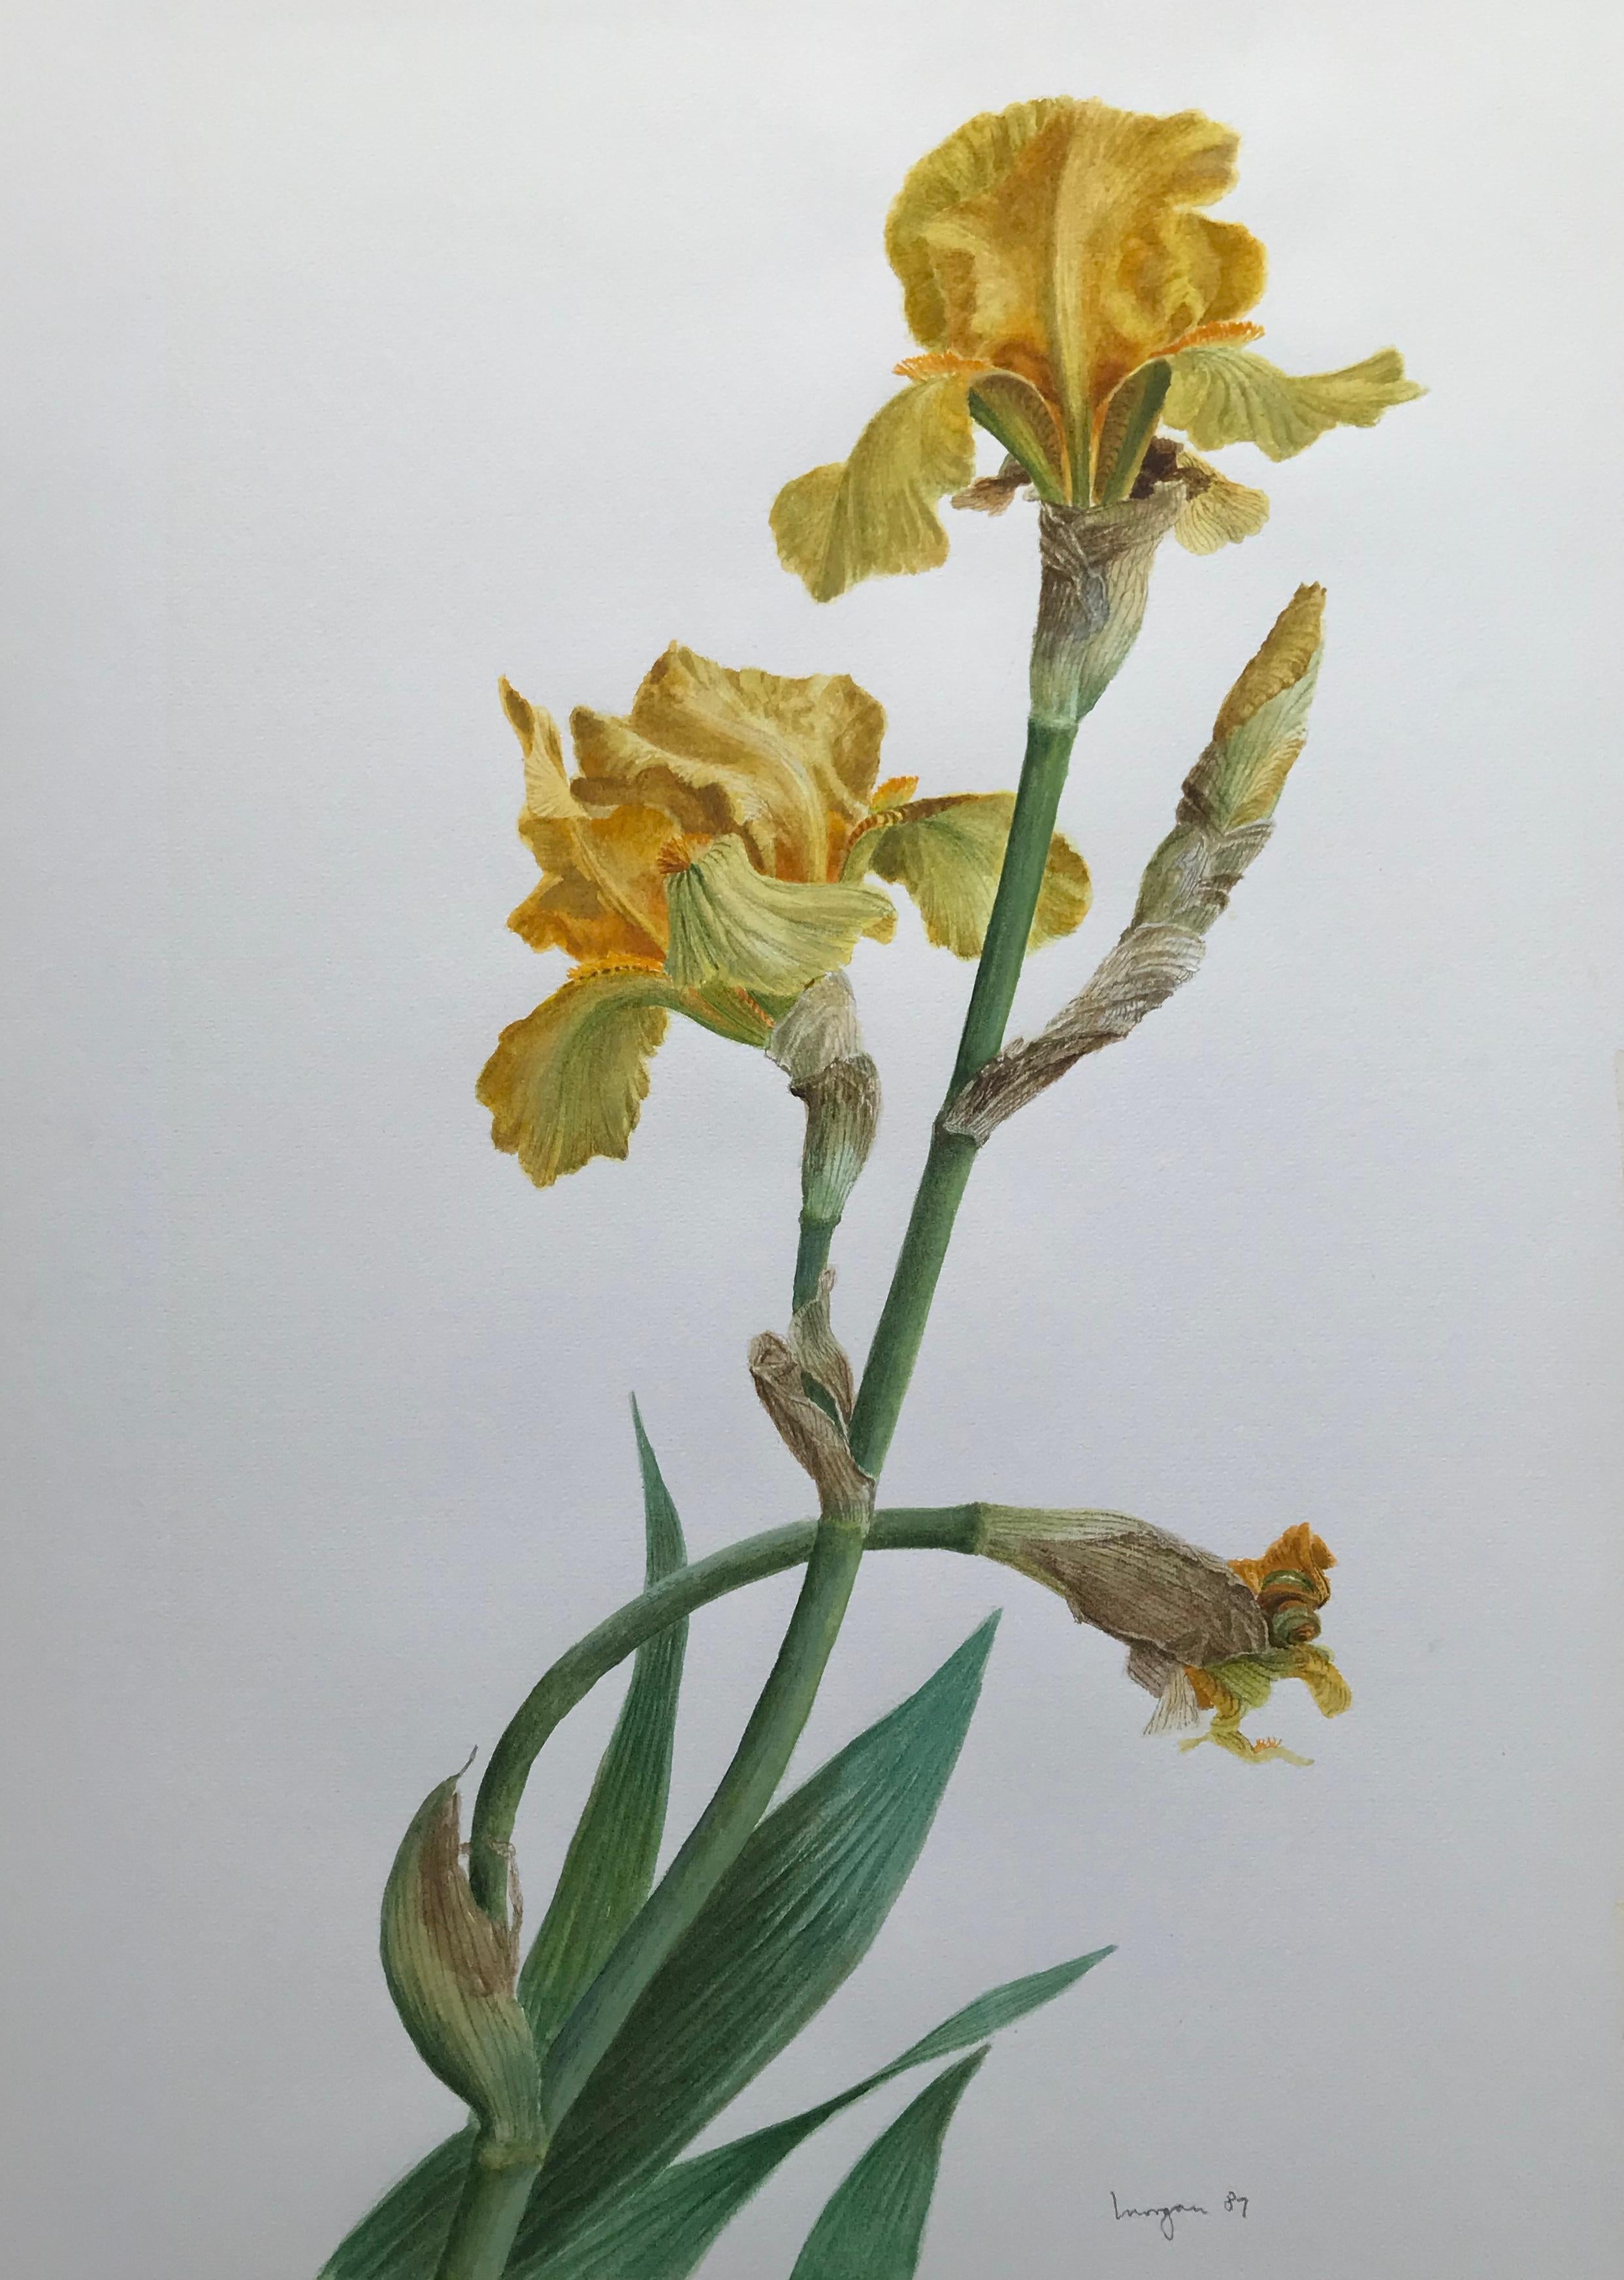 Glyn Morgan (1926 - 2015)
Benton Apollo Iris,
Signed and dated (19)87
Watercolour,
19 x 13½ inches 
26 x 20 including the frame

This exquisitely detailed study of one Cedric Morris' iris varieties shows Morgan's first rate draughtsmanship and eye